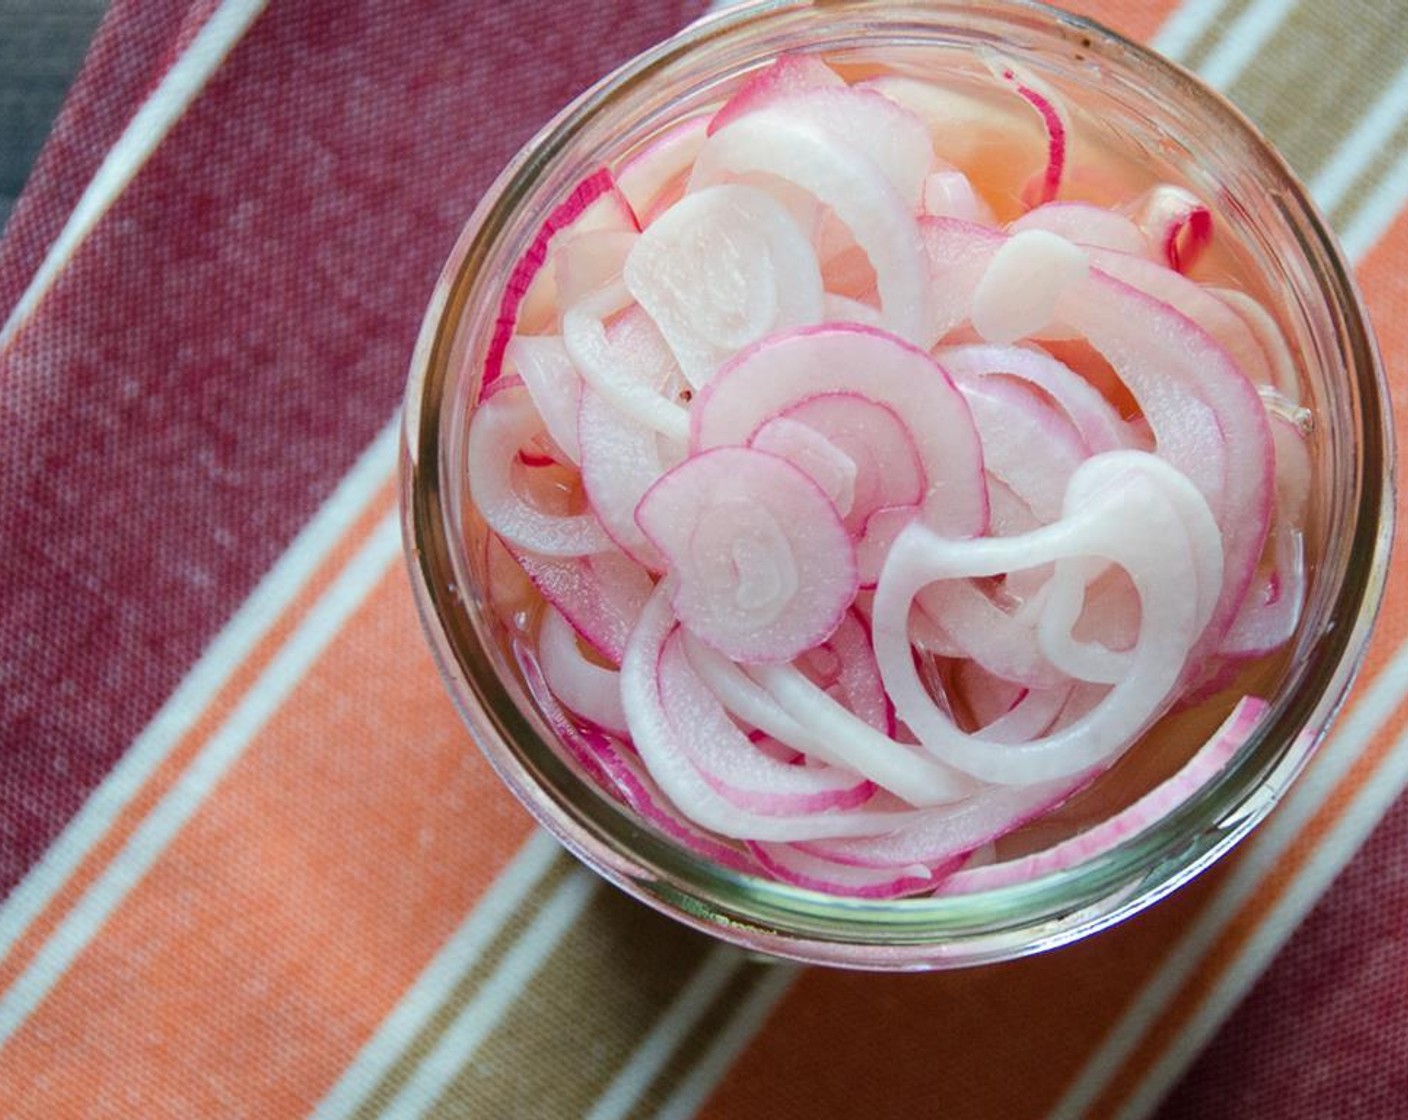 step 4 Combine Apple Cider Vinegar (1 cup), Granulated Sugar (1/2 Tbsp) and Kosher Salt (1 Tbsp) in a cup. Stir until sugar and salt have dissolved. Place the Red Onion (1) in a small bowl and cover with the vinegar mixture.